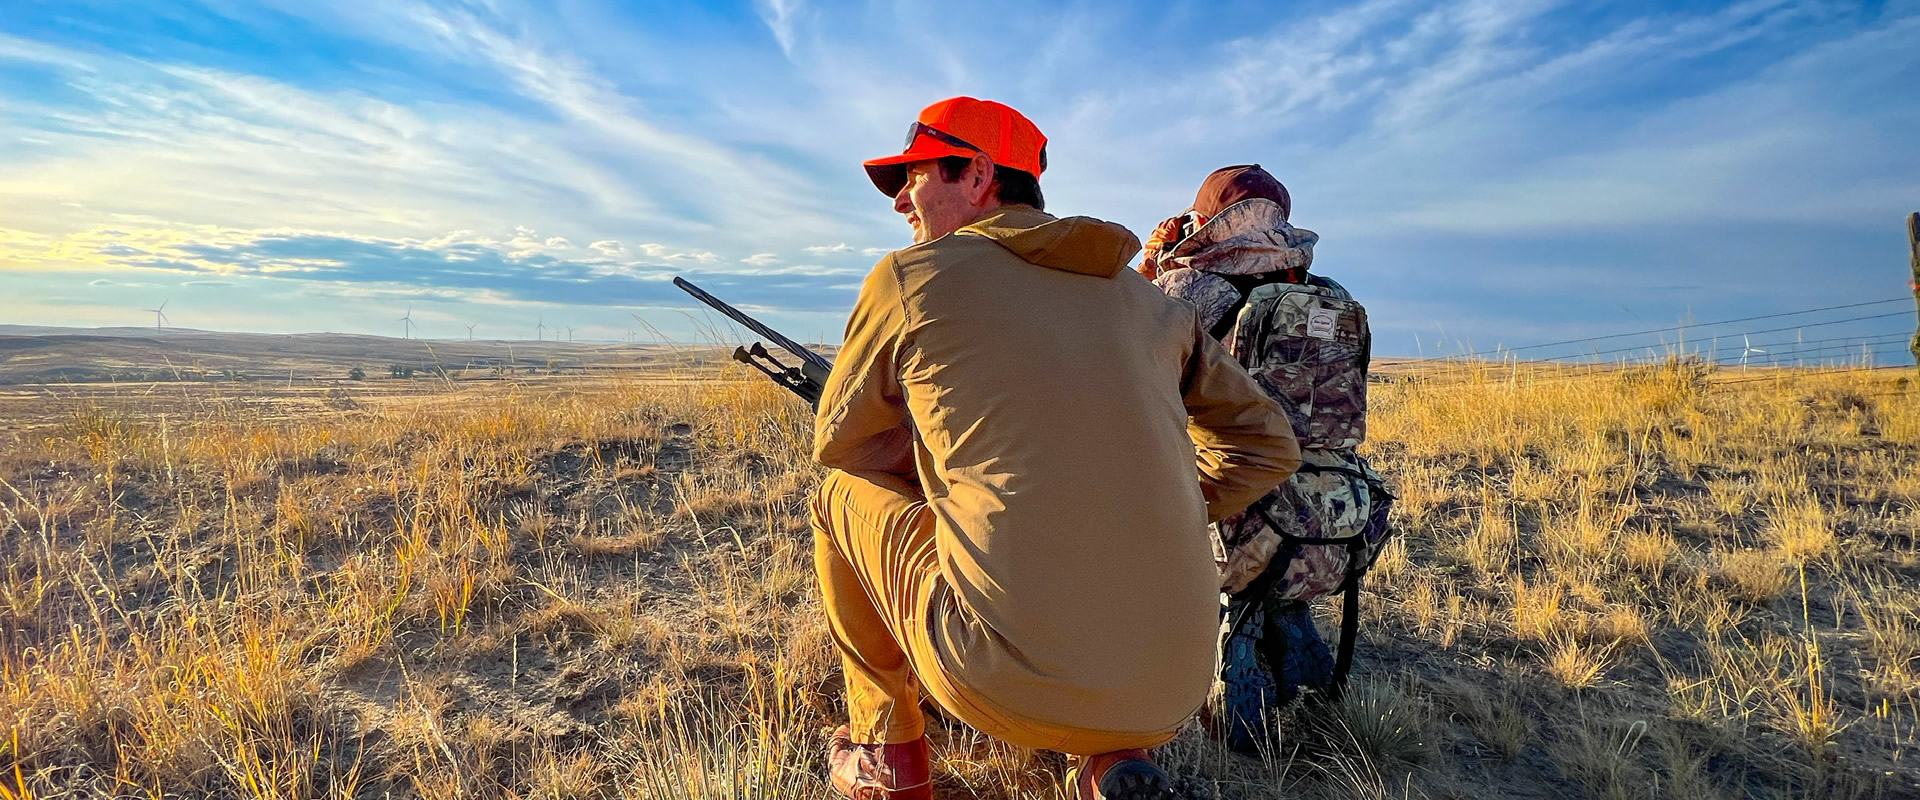 Experienced Wyoming Hunt Guide